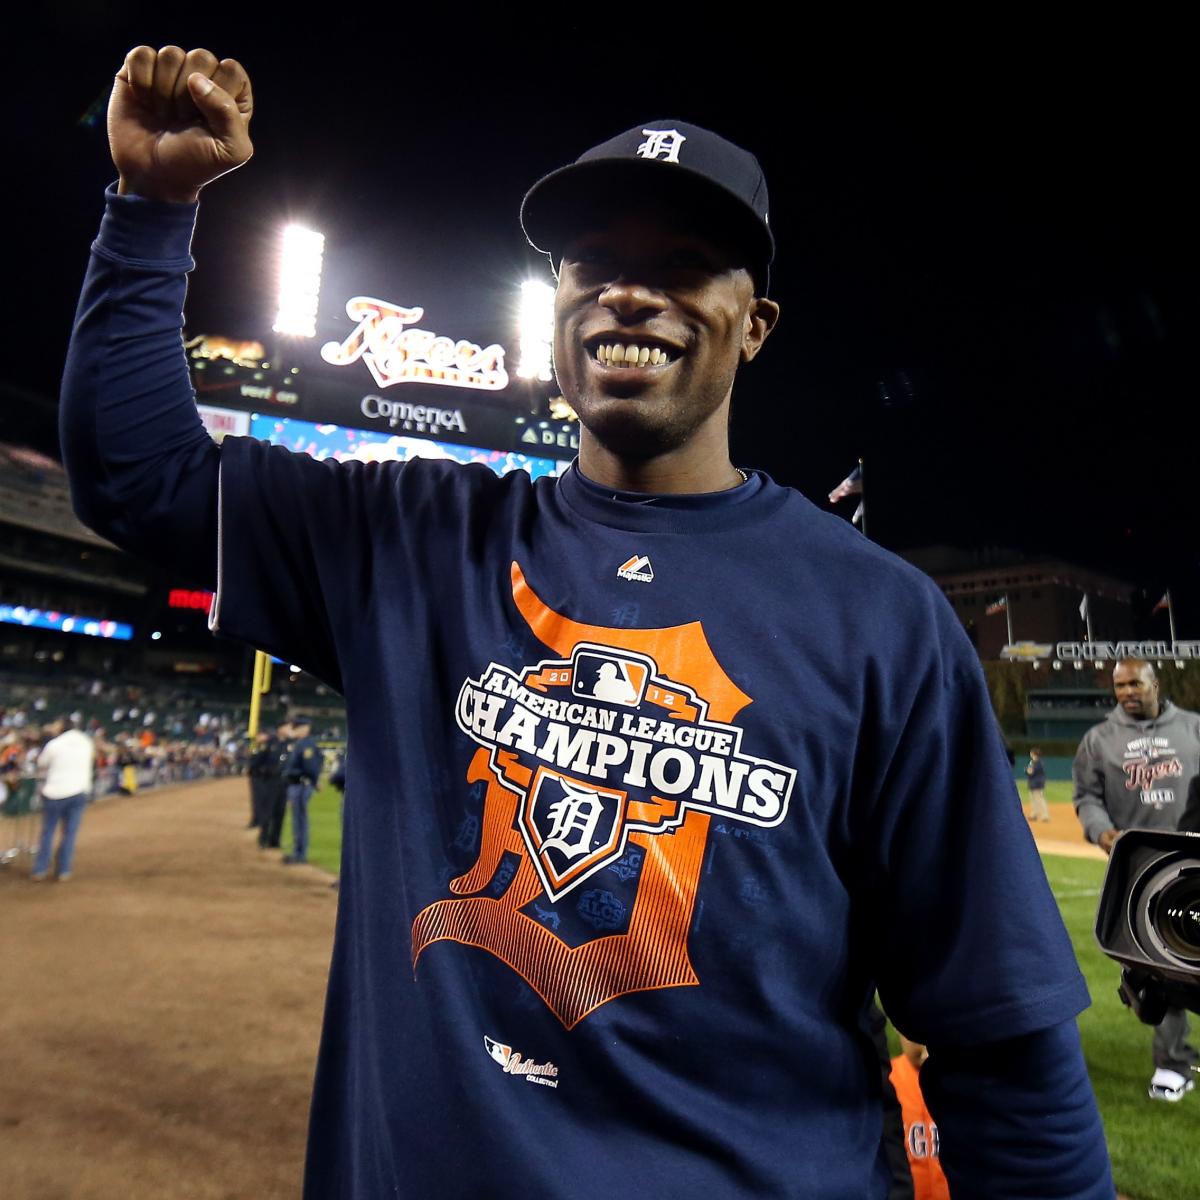 WITH VIDEO: Tigers to ship Granderson to Yankees – The Oakland Press